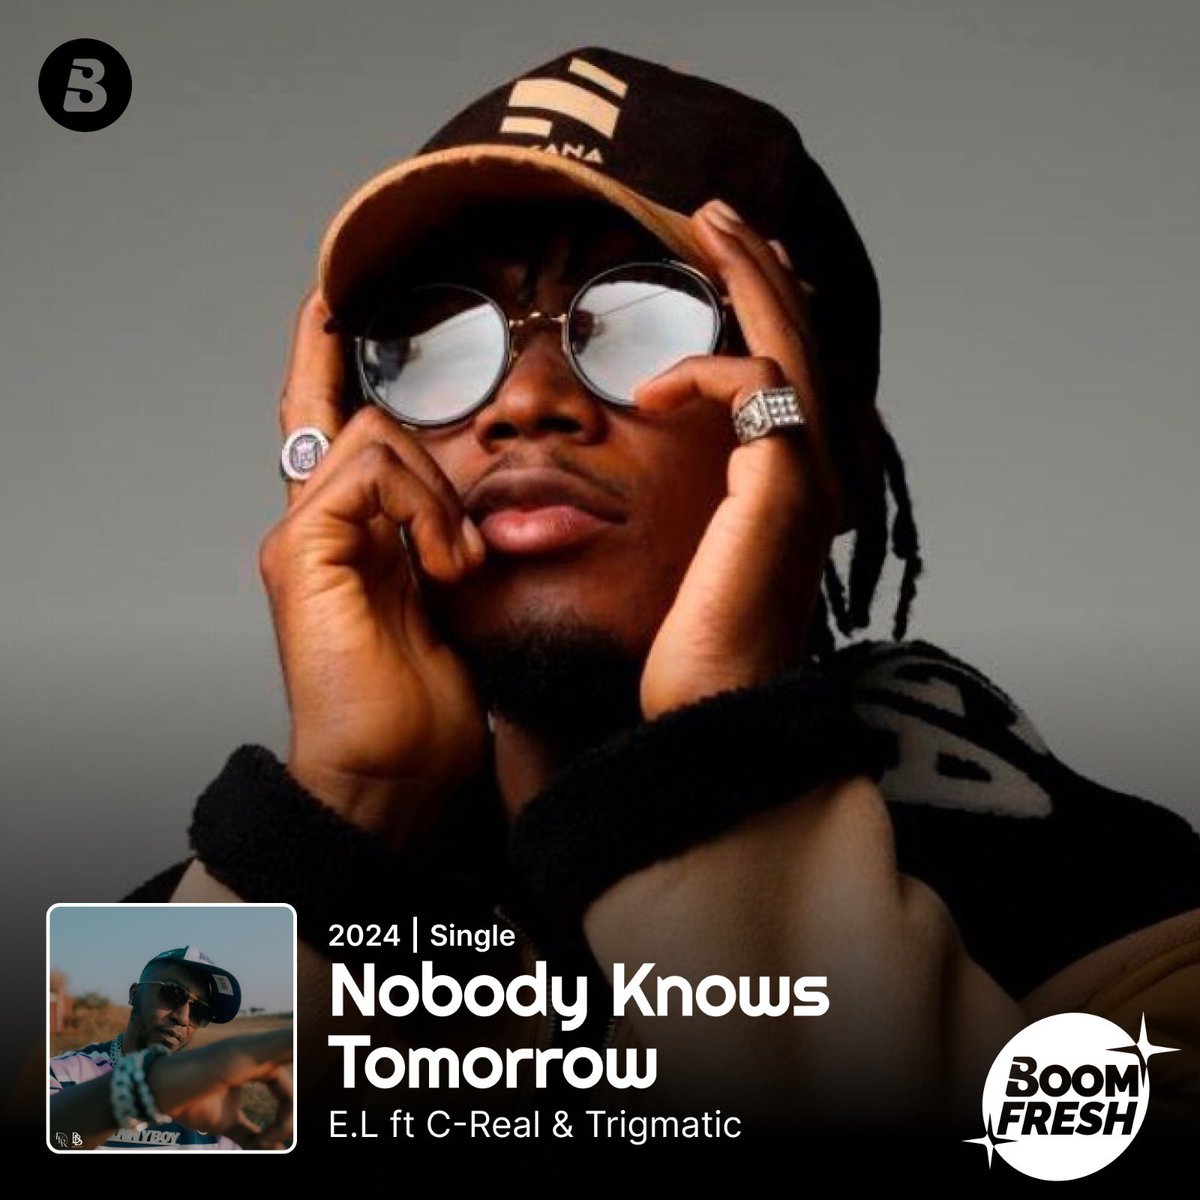 💥BOOMFRESH💥 @ELgh_ featuring @C_RealMC and @trigmaticrocks. This trio on that tune, if you know, you know 👌🏽😉. Stream “Nobody Knows Tomorrow” now on #Boomplay➡️: Boom.lnk.to/E.LNobodyKnows… #HomeOfMusic #NewMusicFriday